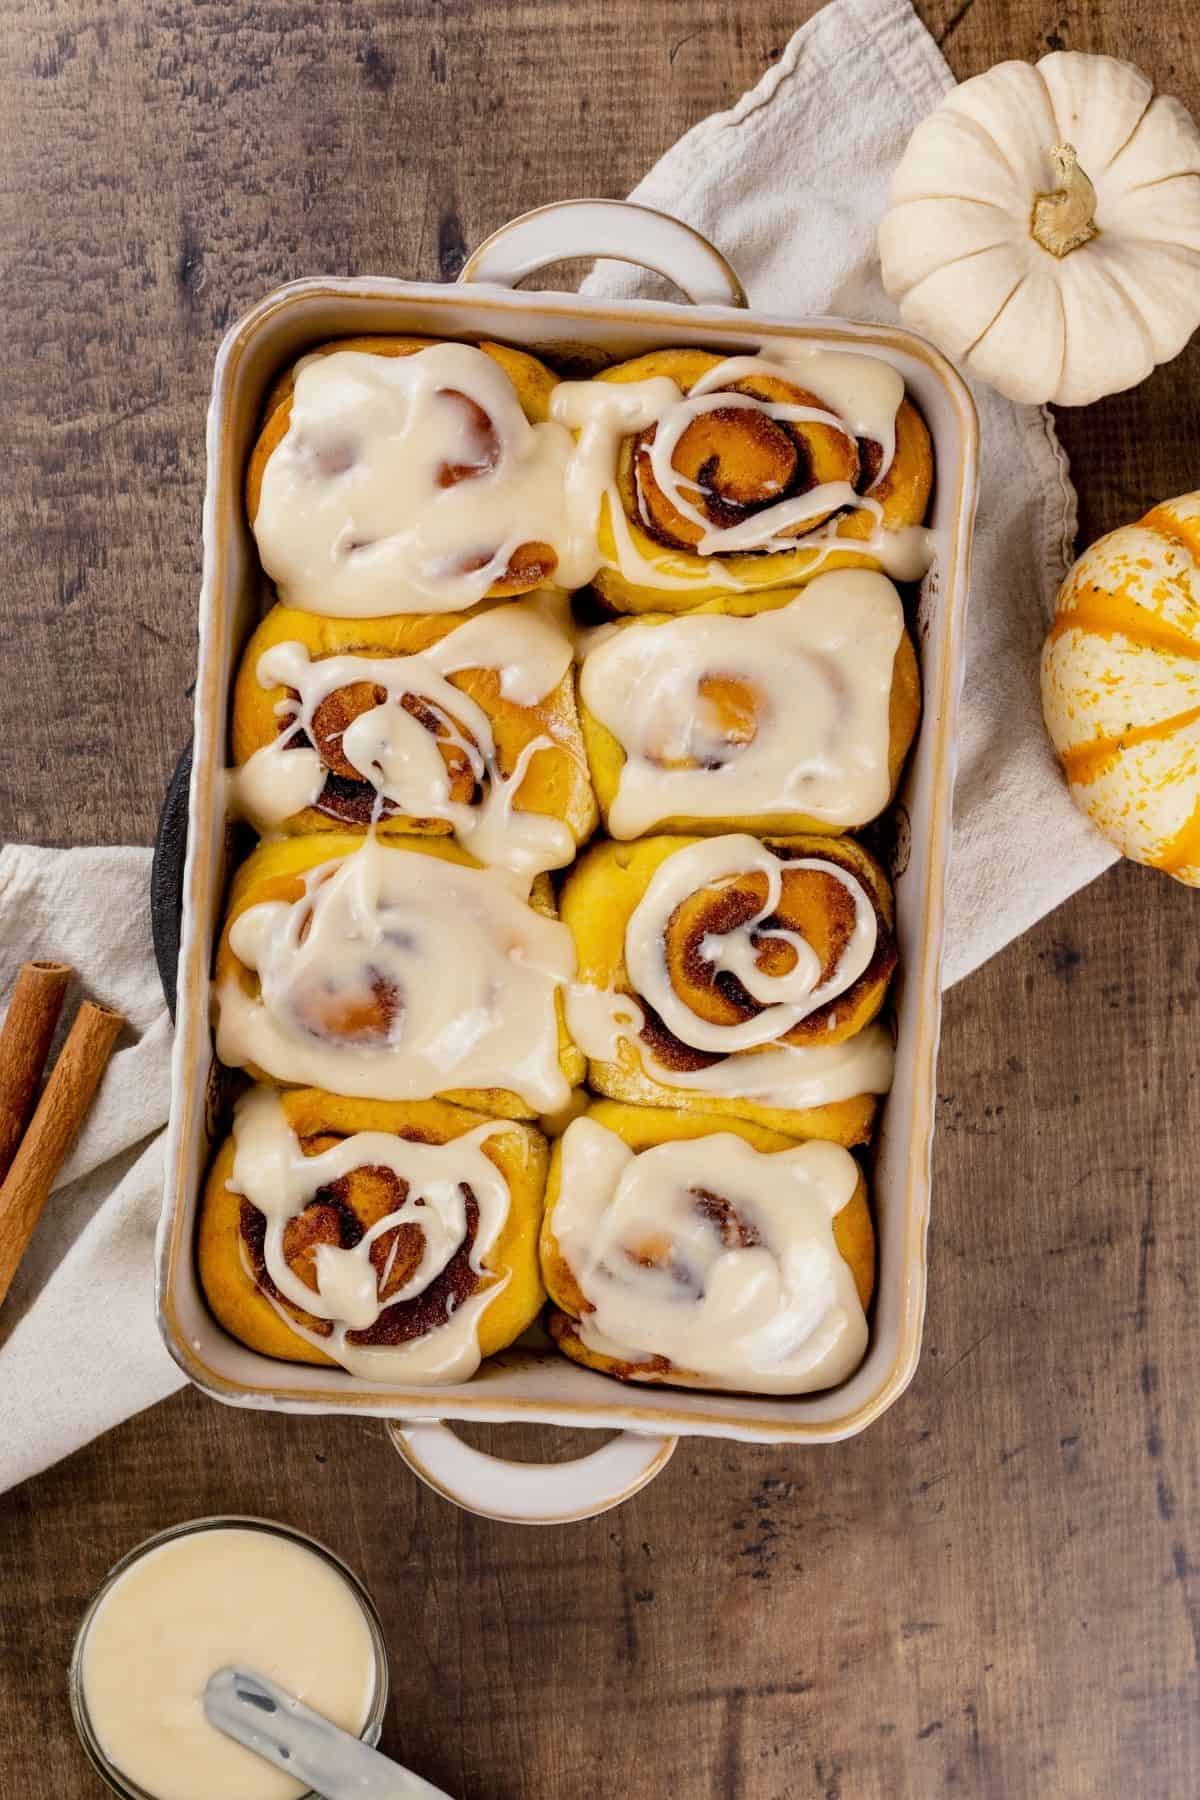 looking down on a baking dish filled with 8 pumpkin cinnamon rolls covered in icing. the dish is on a wood table. mini pumpkins, cinnamon sticks, and a bowl of extra icing is next to the dish.